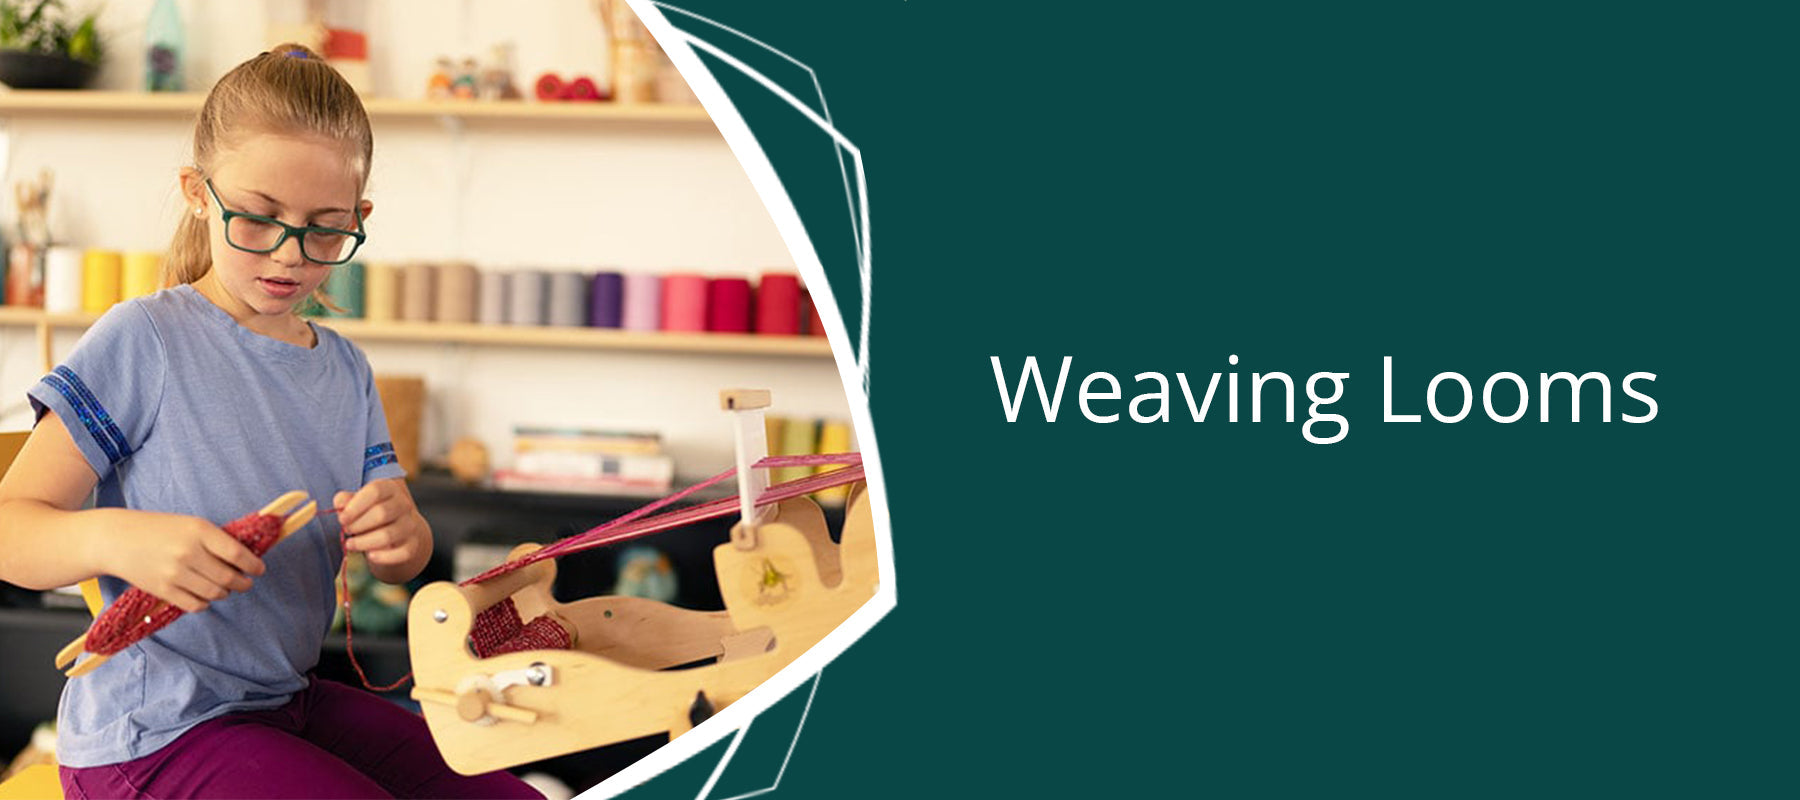 Find your perfect weaving loom - Thread Collective Australia